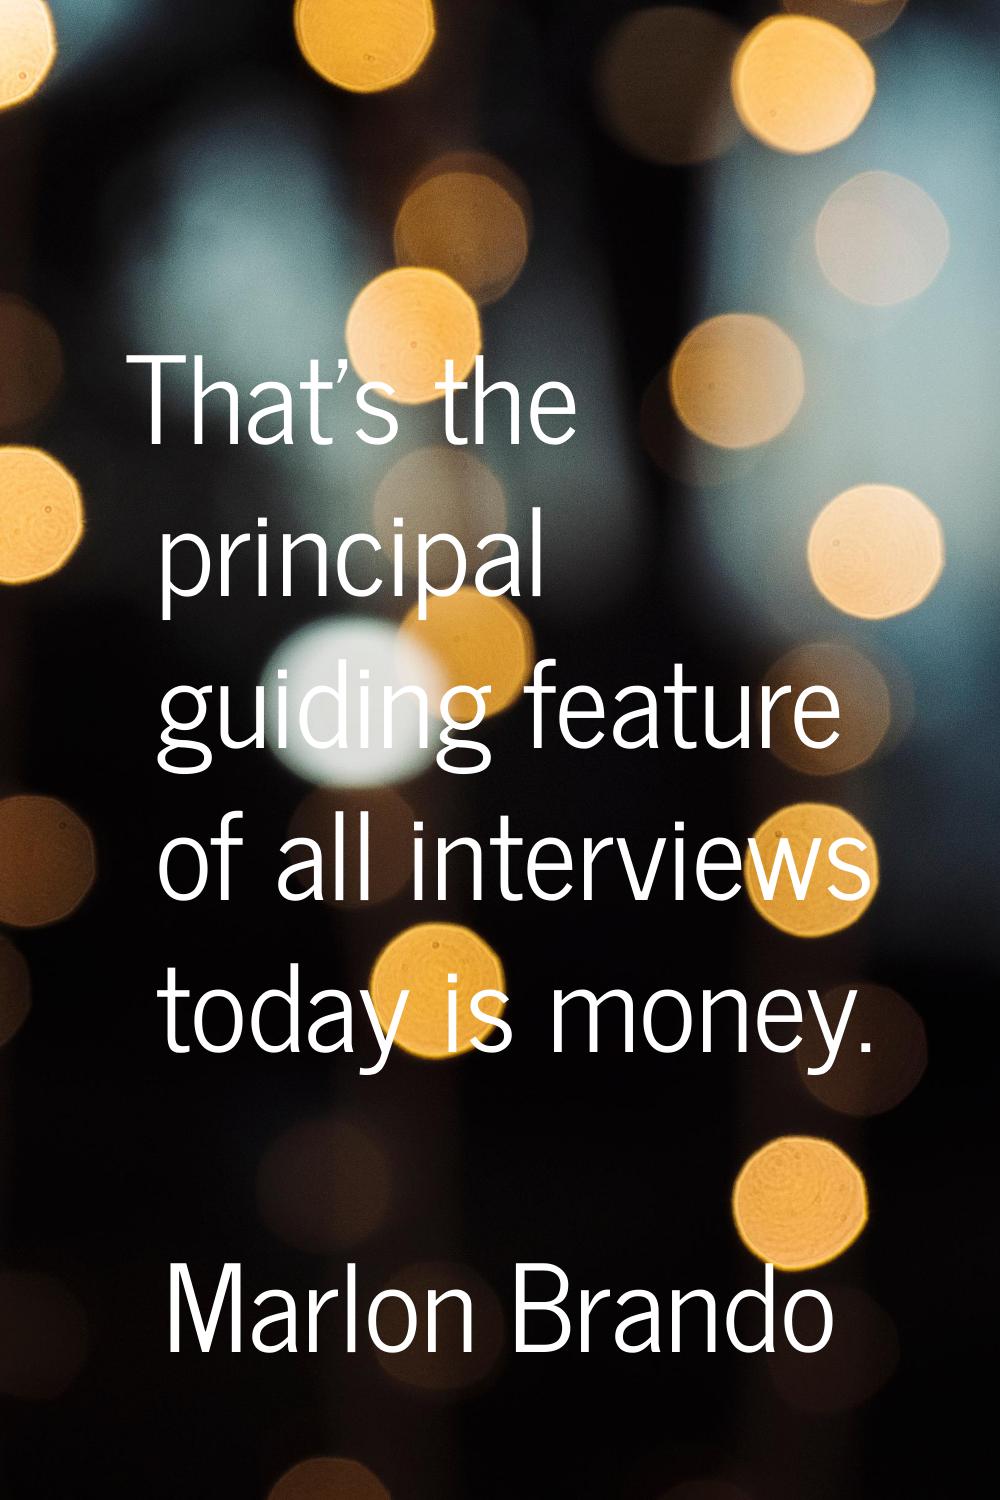 That's the principal guiding feature of all interviews today is money.